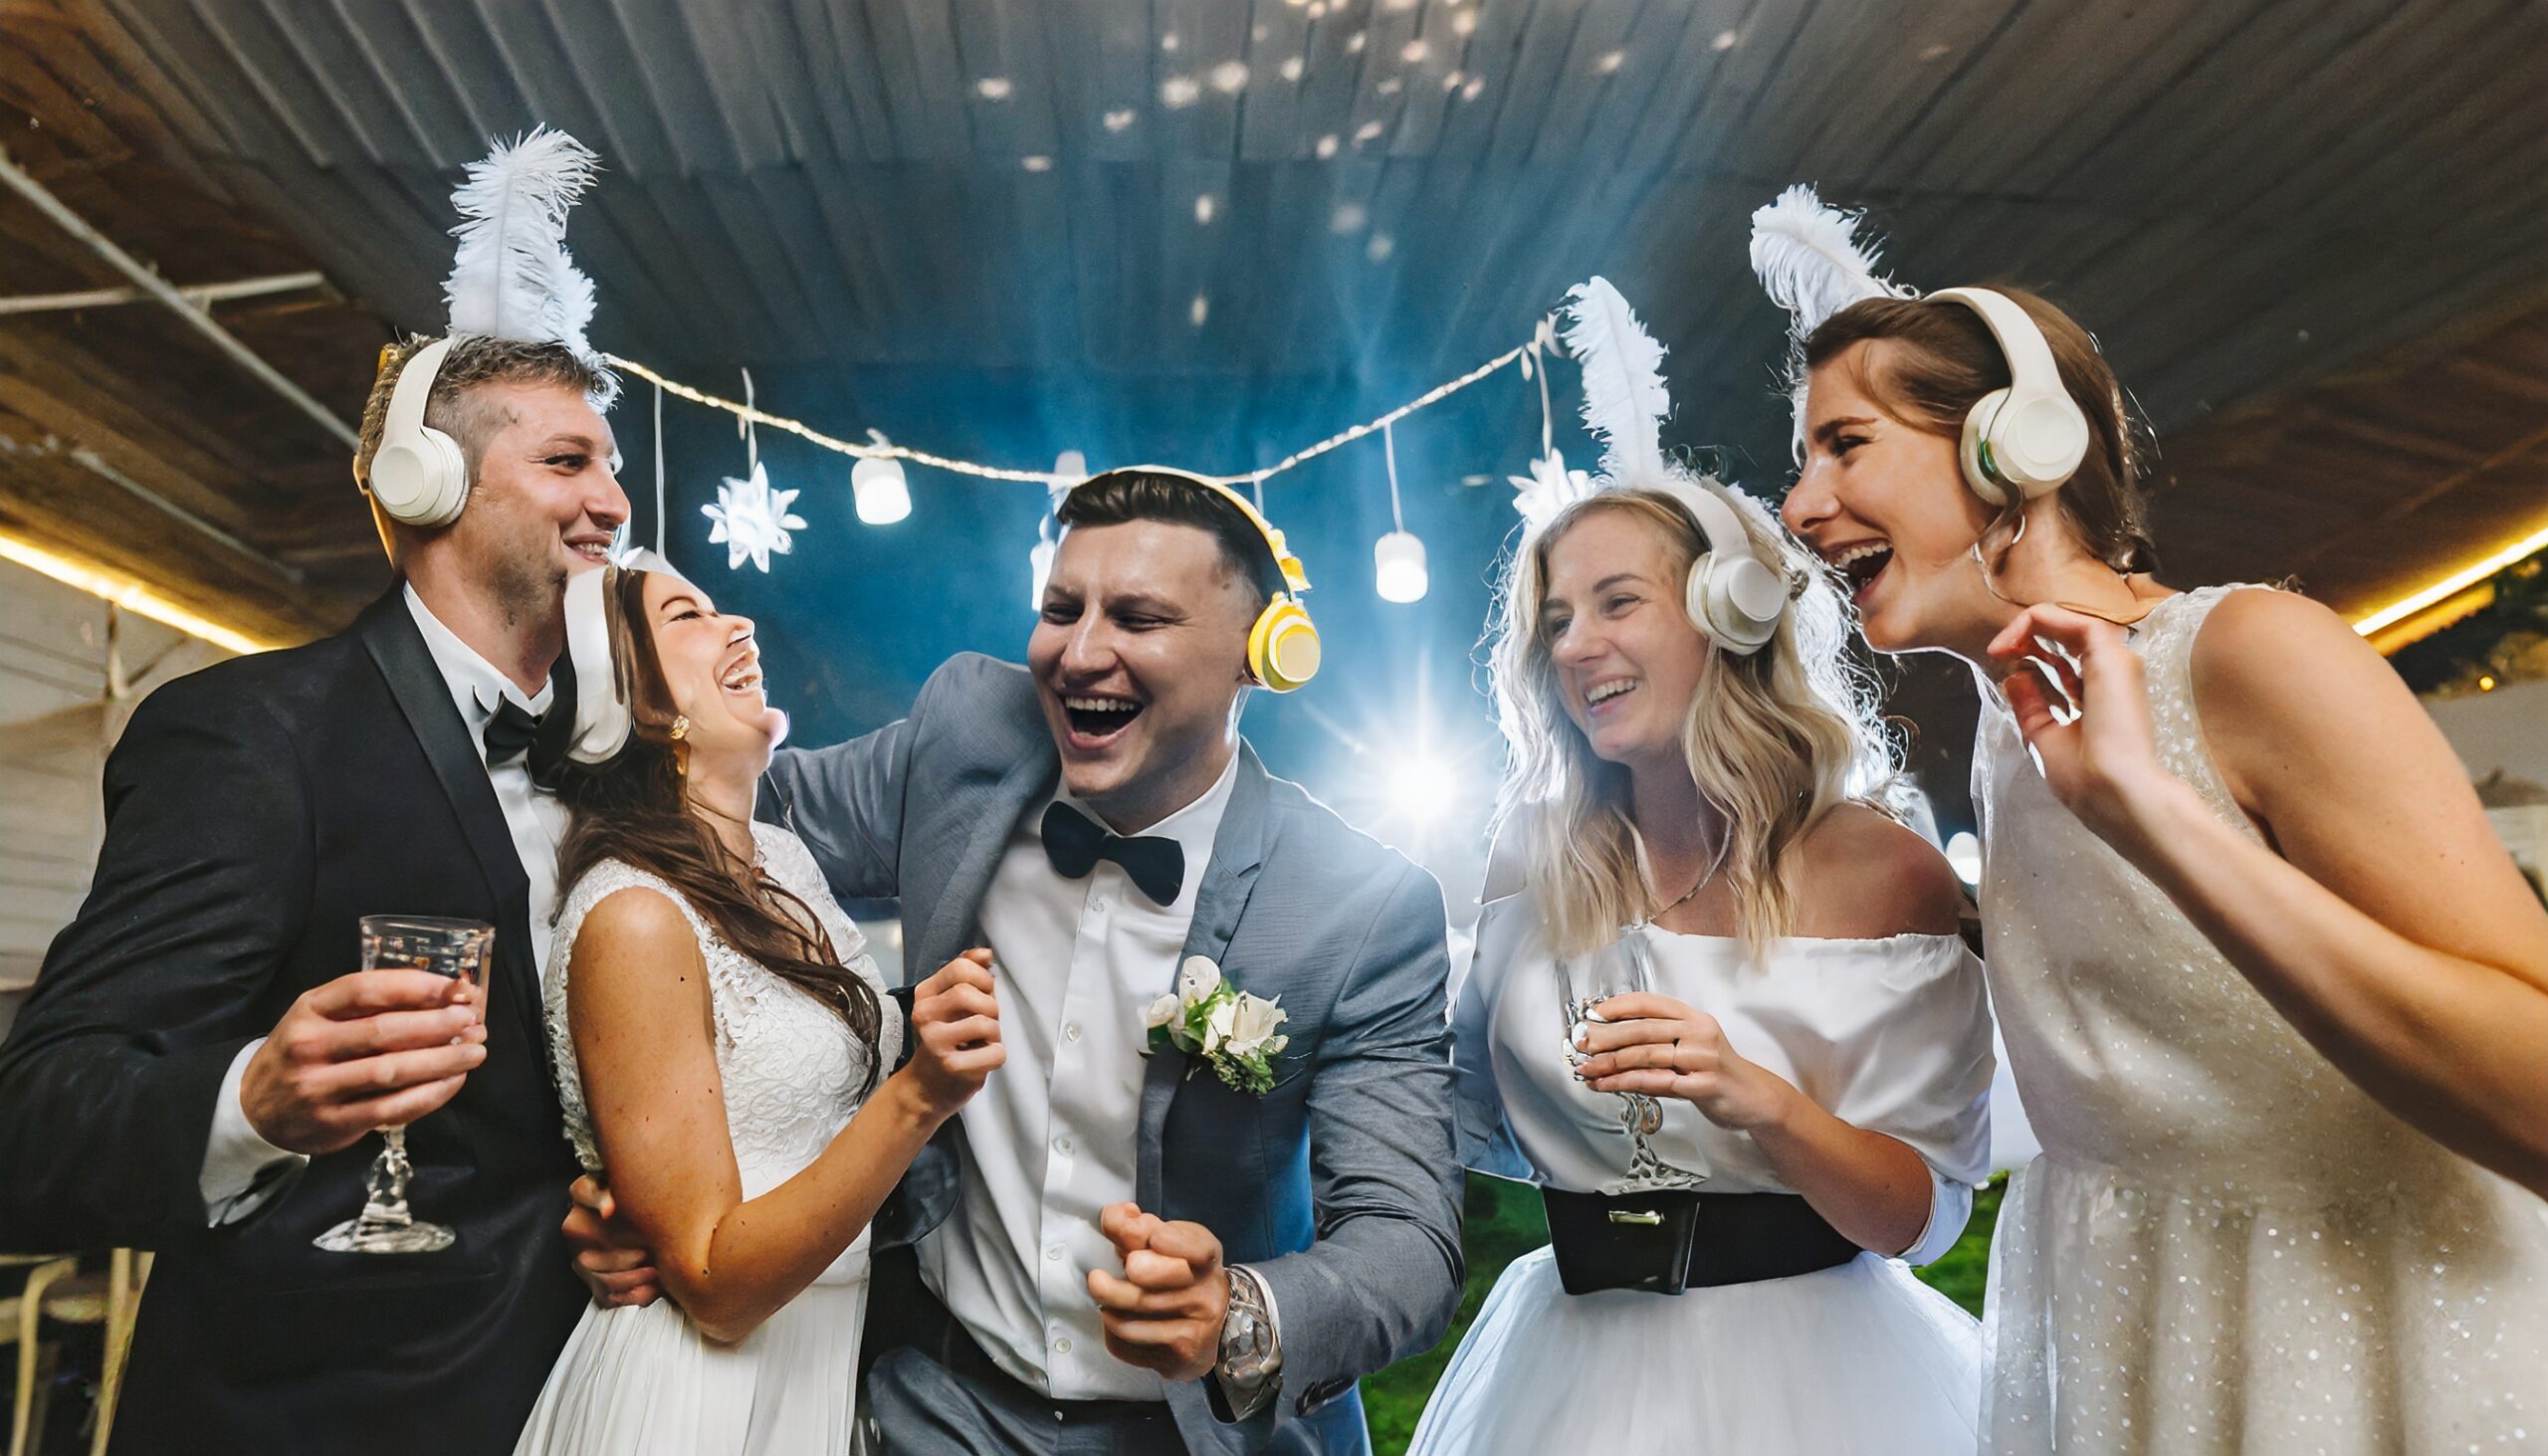 Firefly club party at a wedding. The guests are having fun and they are wearing glowing headphones. (1)